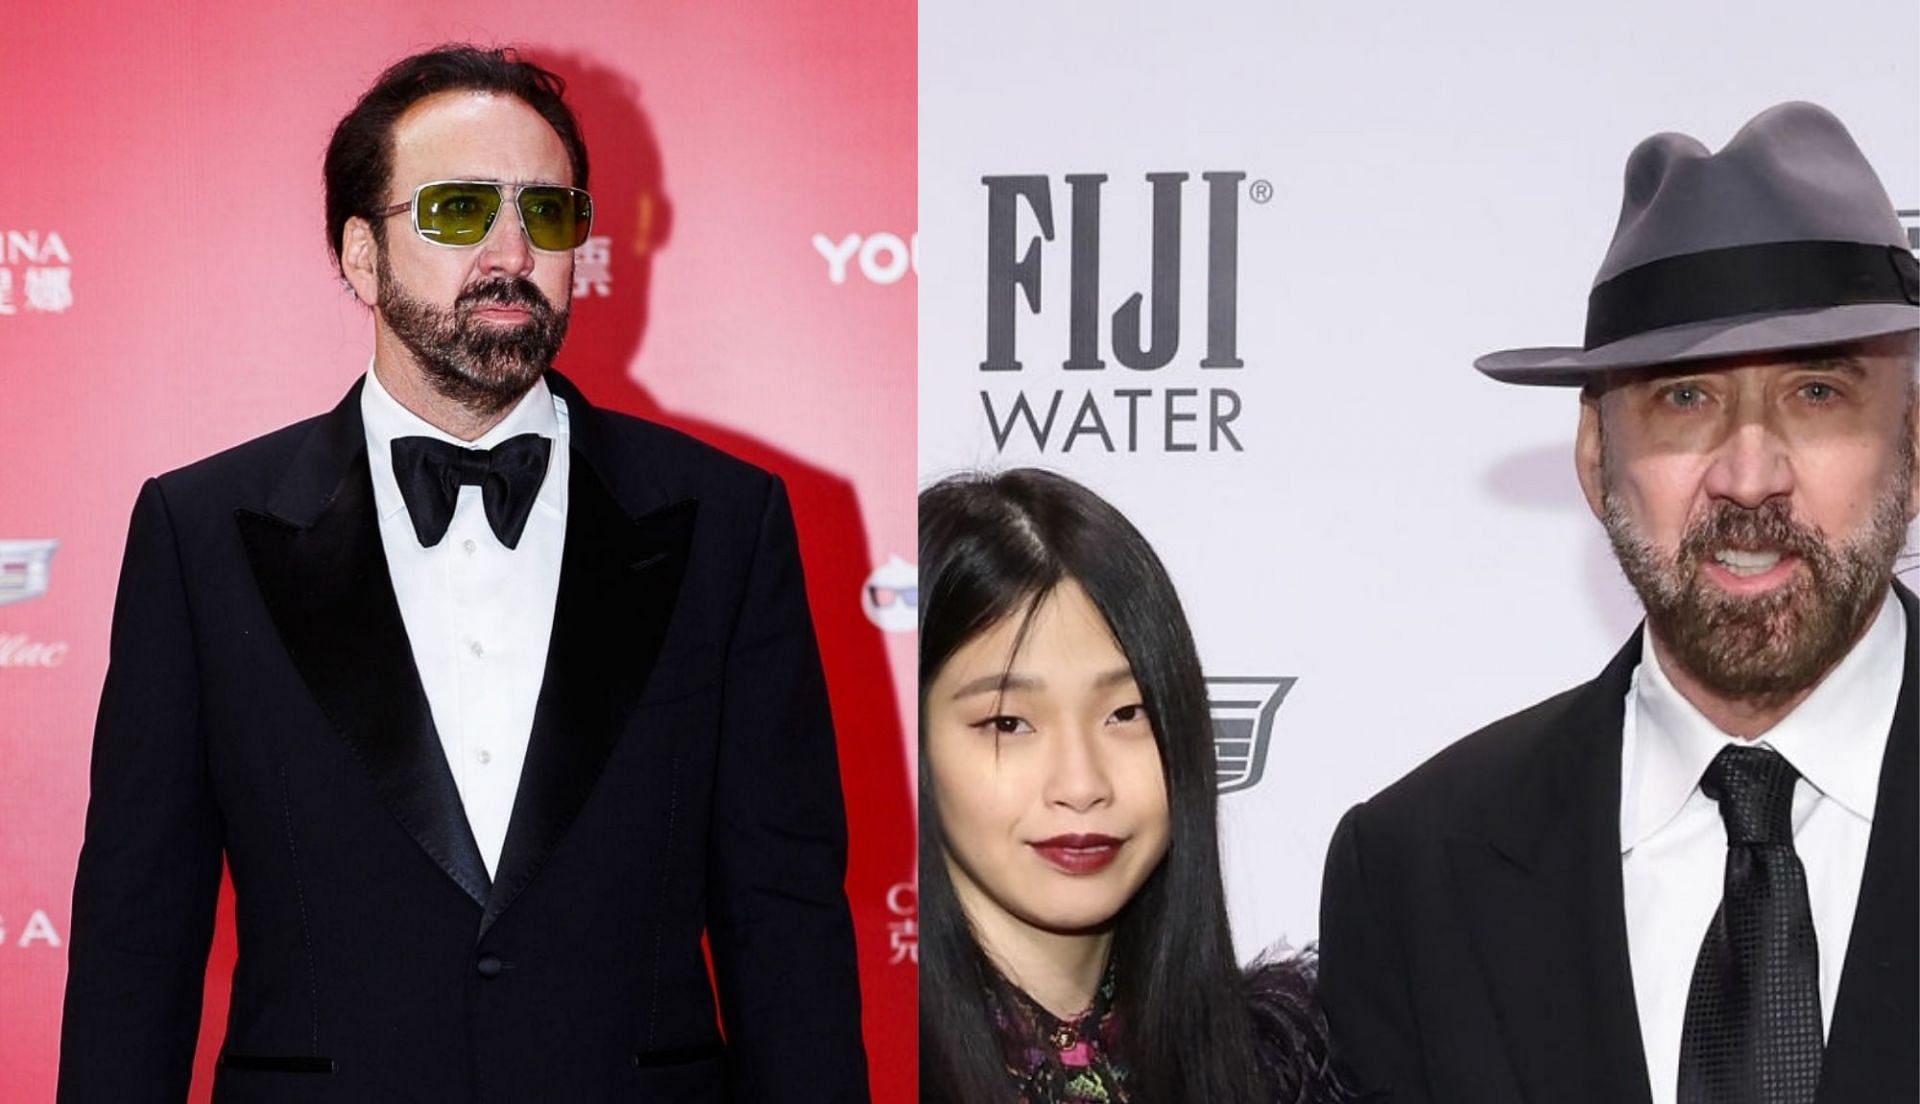 Nicolas Cage and Riko Shibata are expecting their first child together (Image via VCG/Getty Images and Taylor Hill/Getty Images)